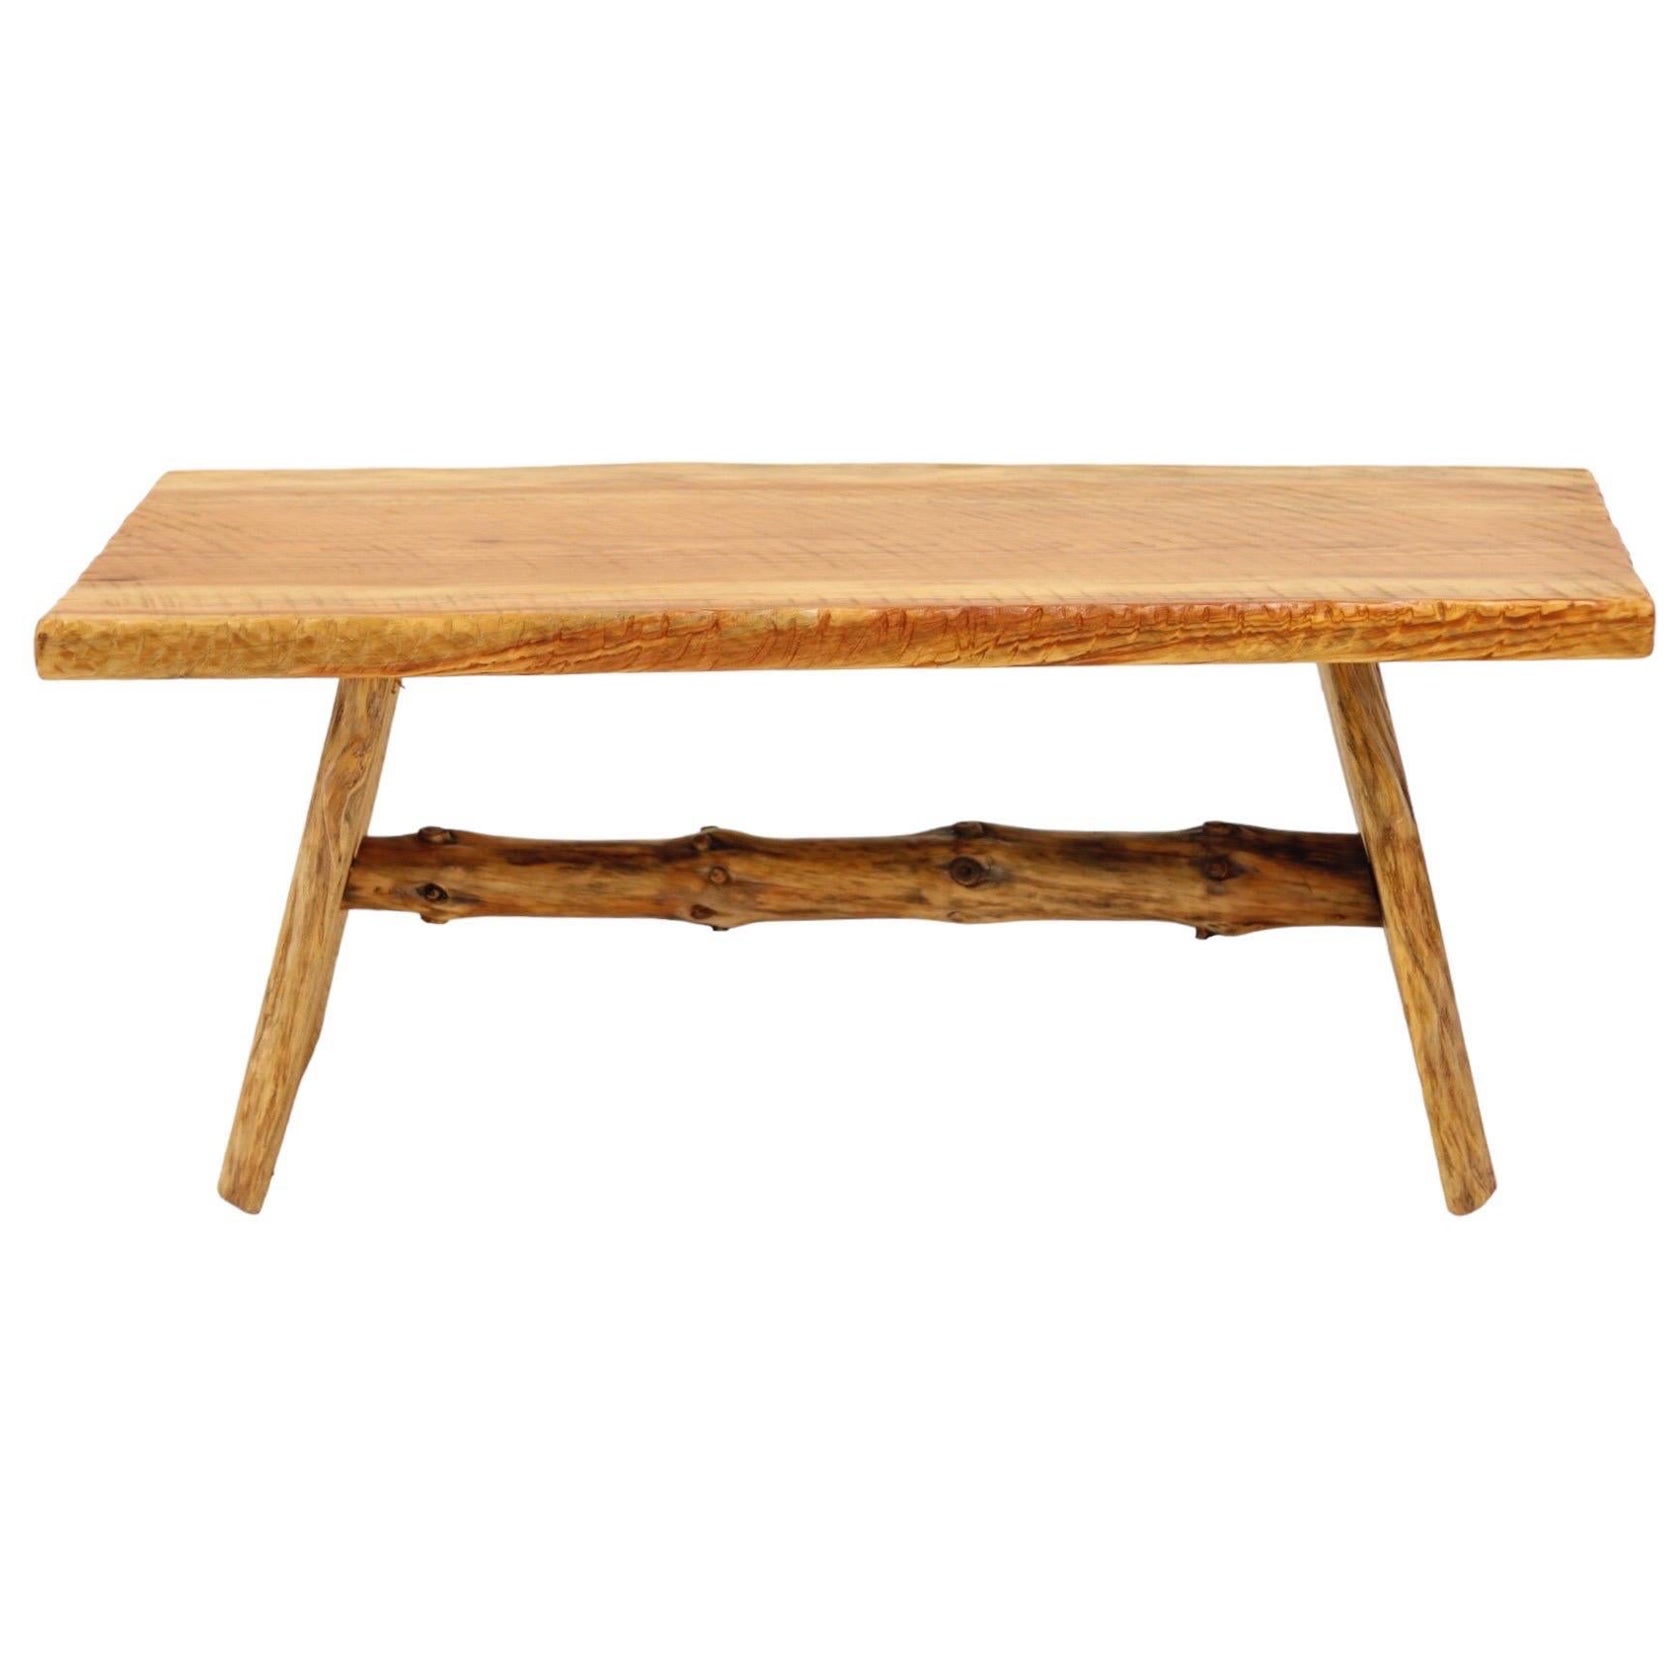 Rustic Live Edge Pine Bench For Sale